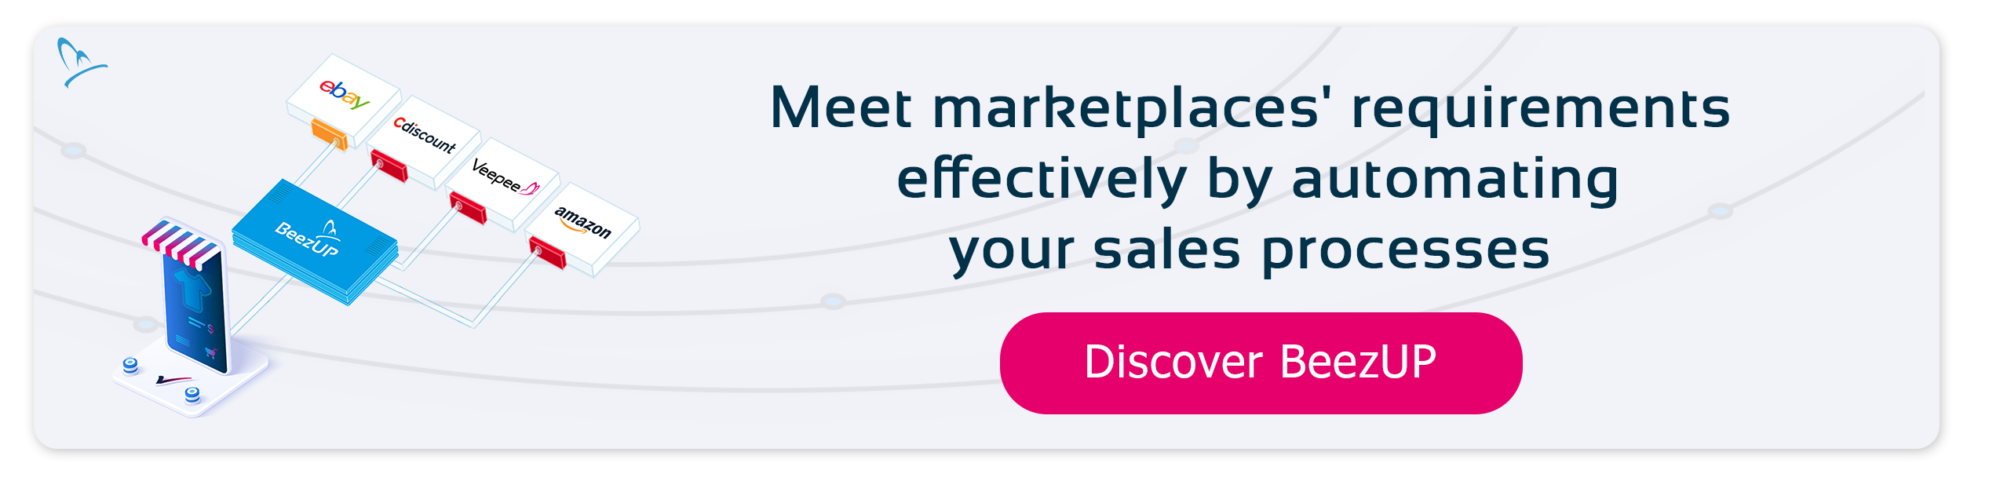 Meet marketplaces' requirements effectively by automating your sales processes | BeezUP